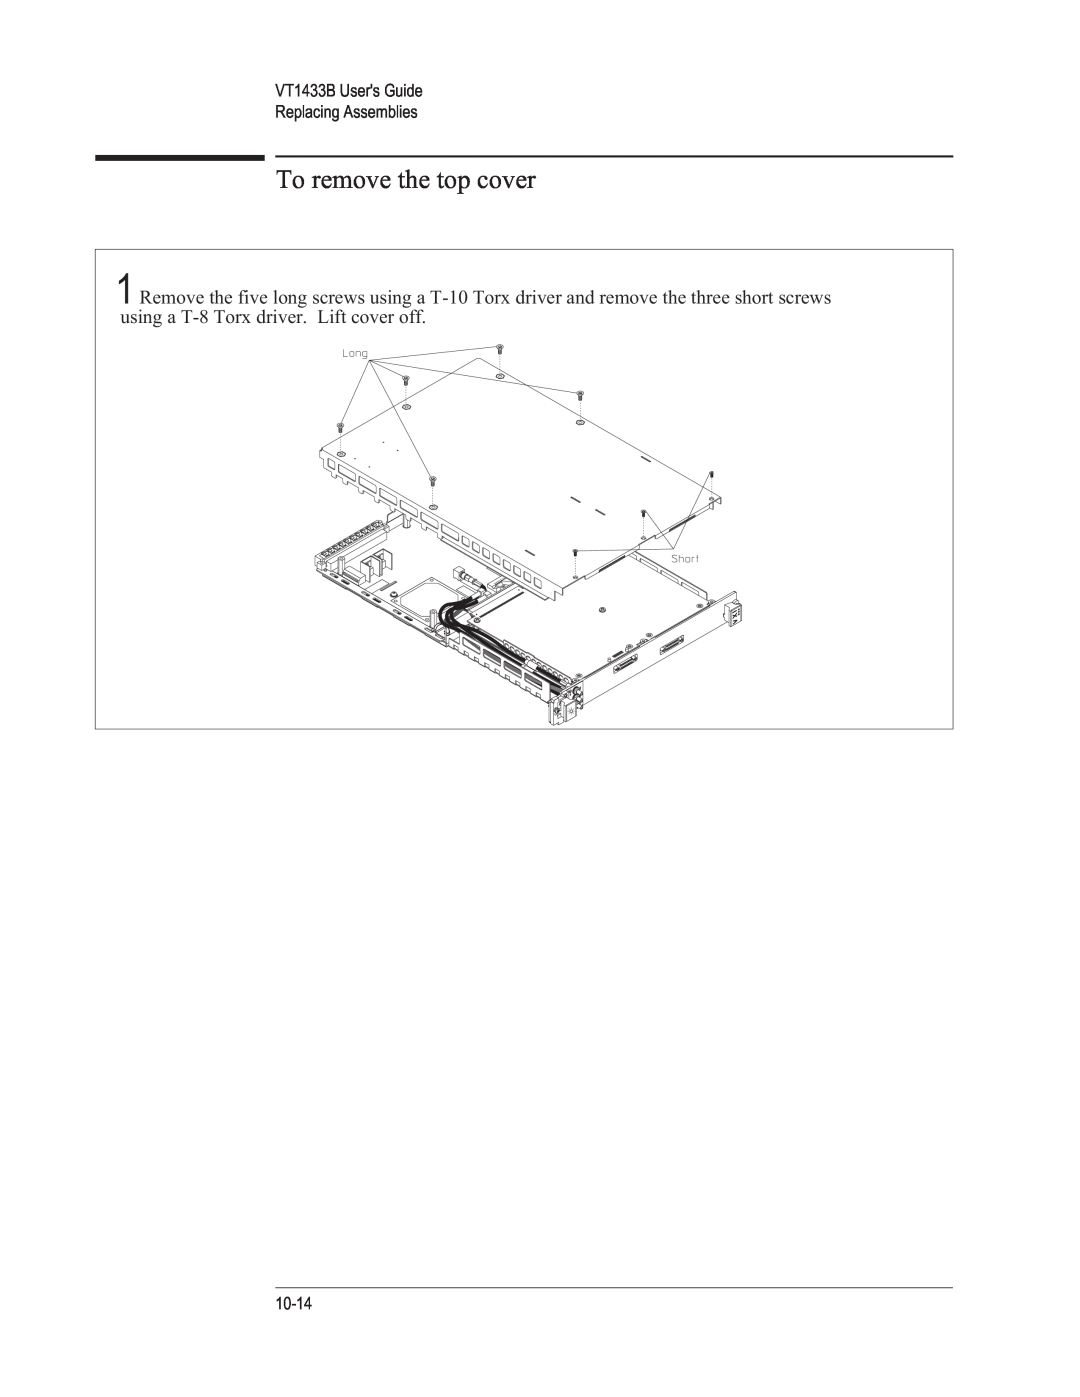 VXI manual To remove the top cover, VT1433B Users Guide Replacing Assemblies, 10-14 